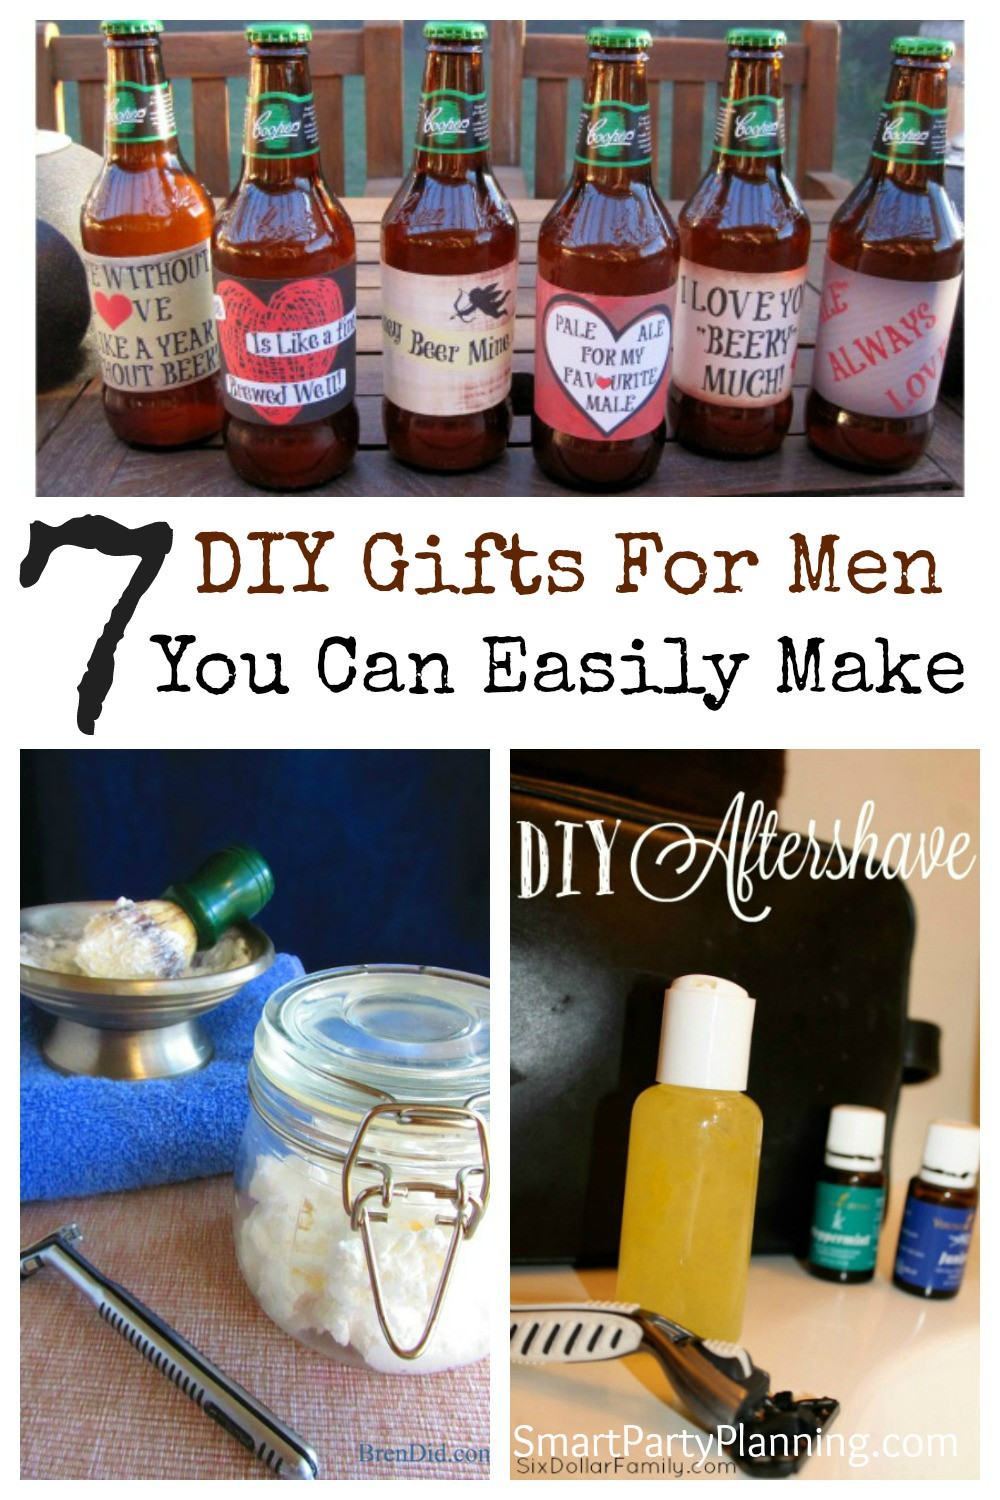 DIY Gifts That Say I Love You
 7 DIY Gifts For Men You Can Easily Make